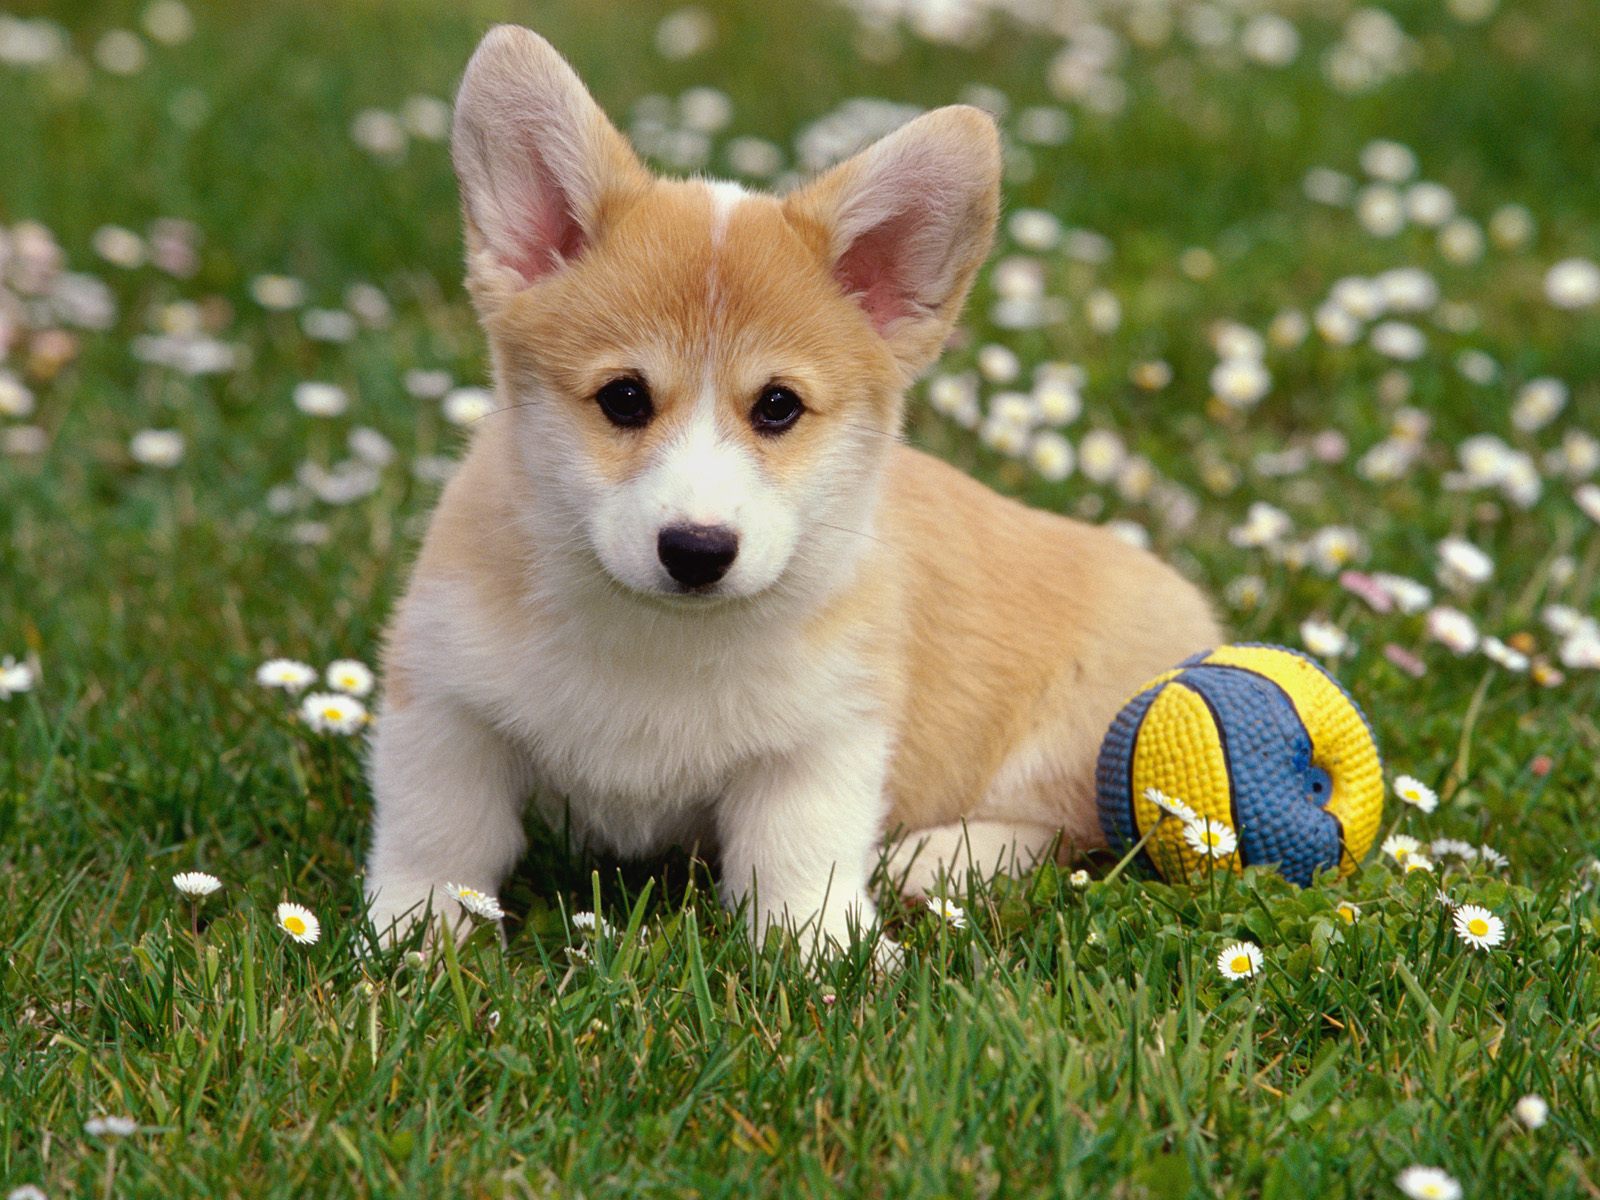 dog hd wallpapers images for dog hd dog wallpapers full hd wallpaper 1600x1200